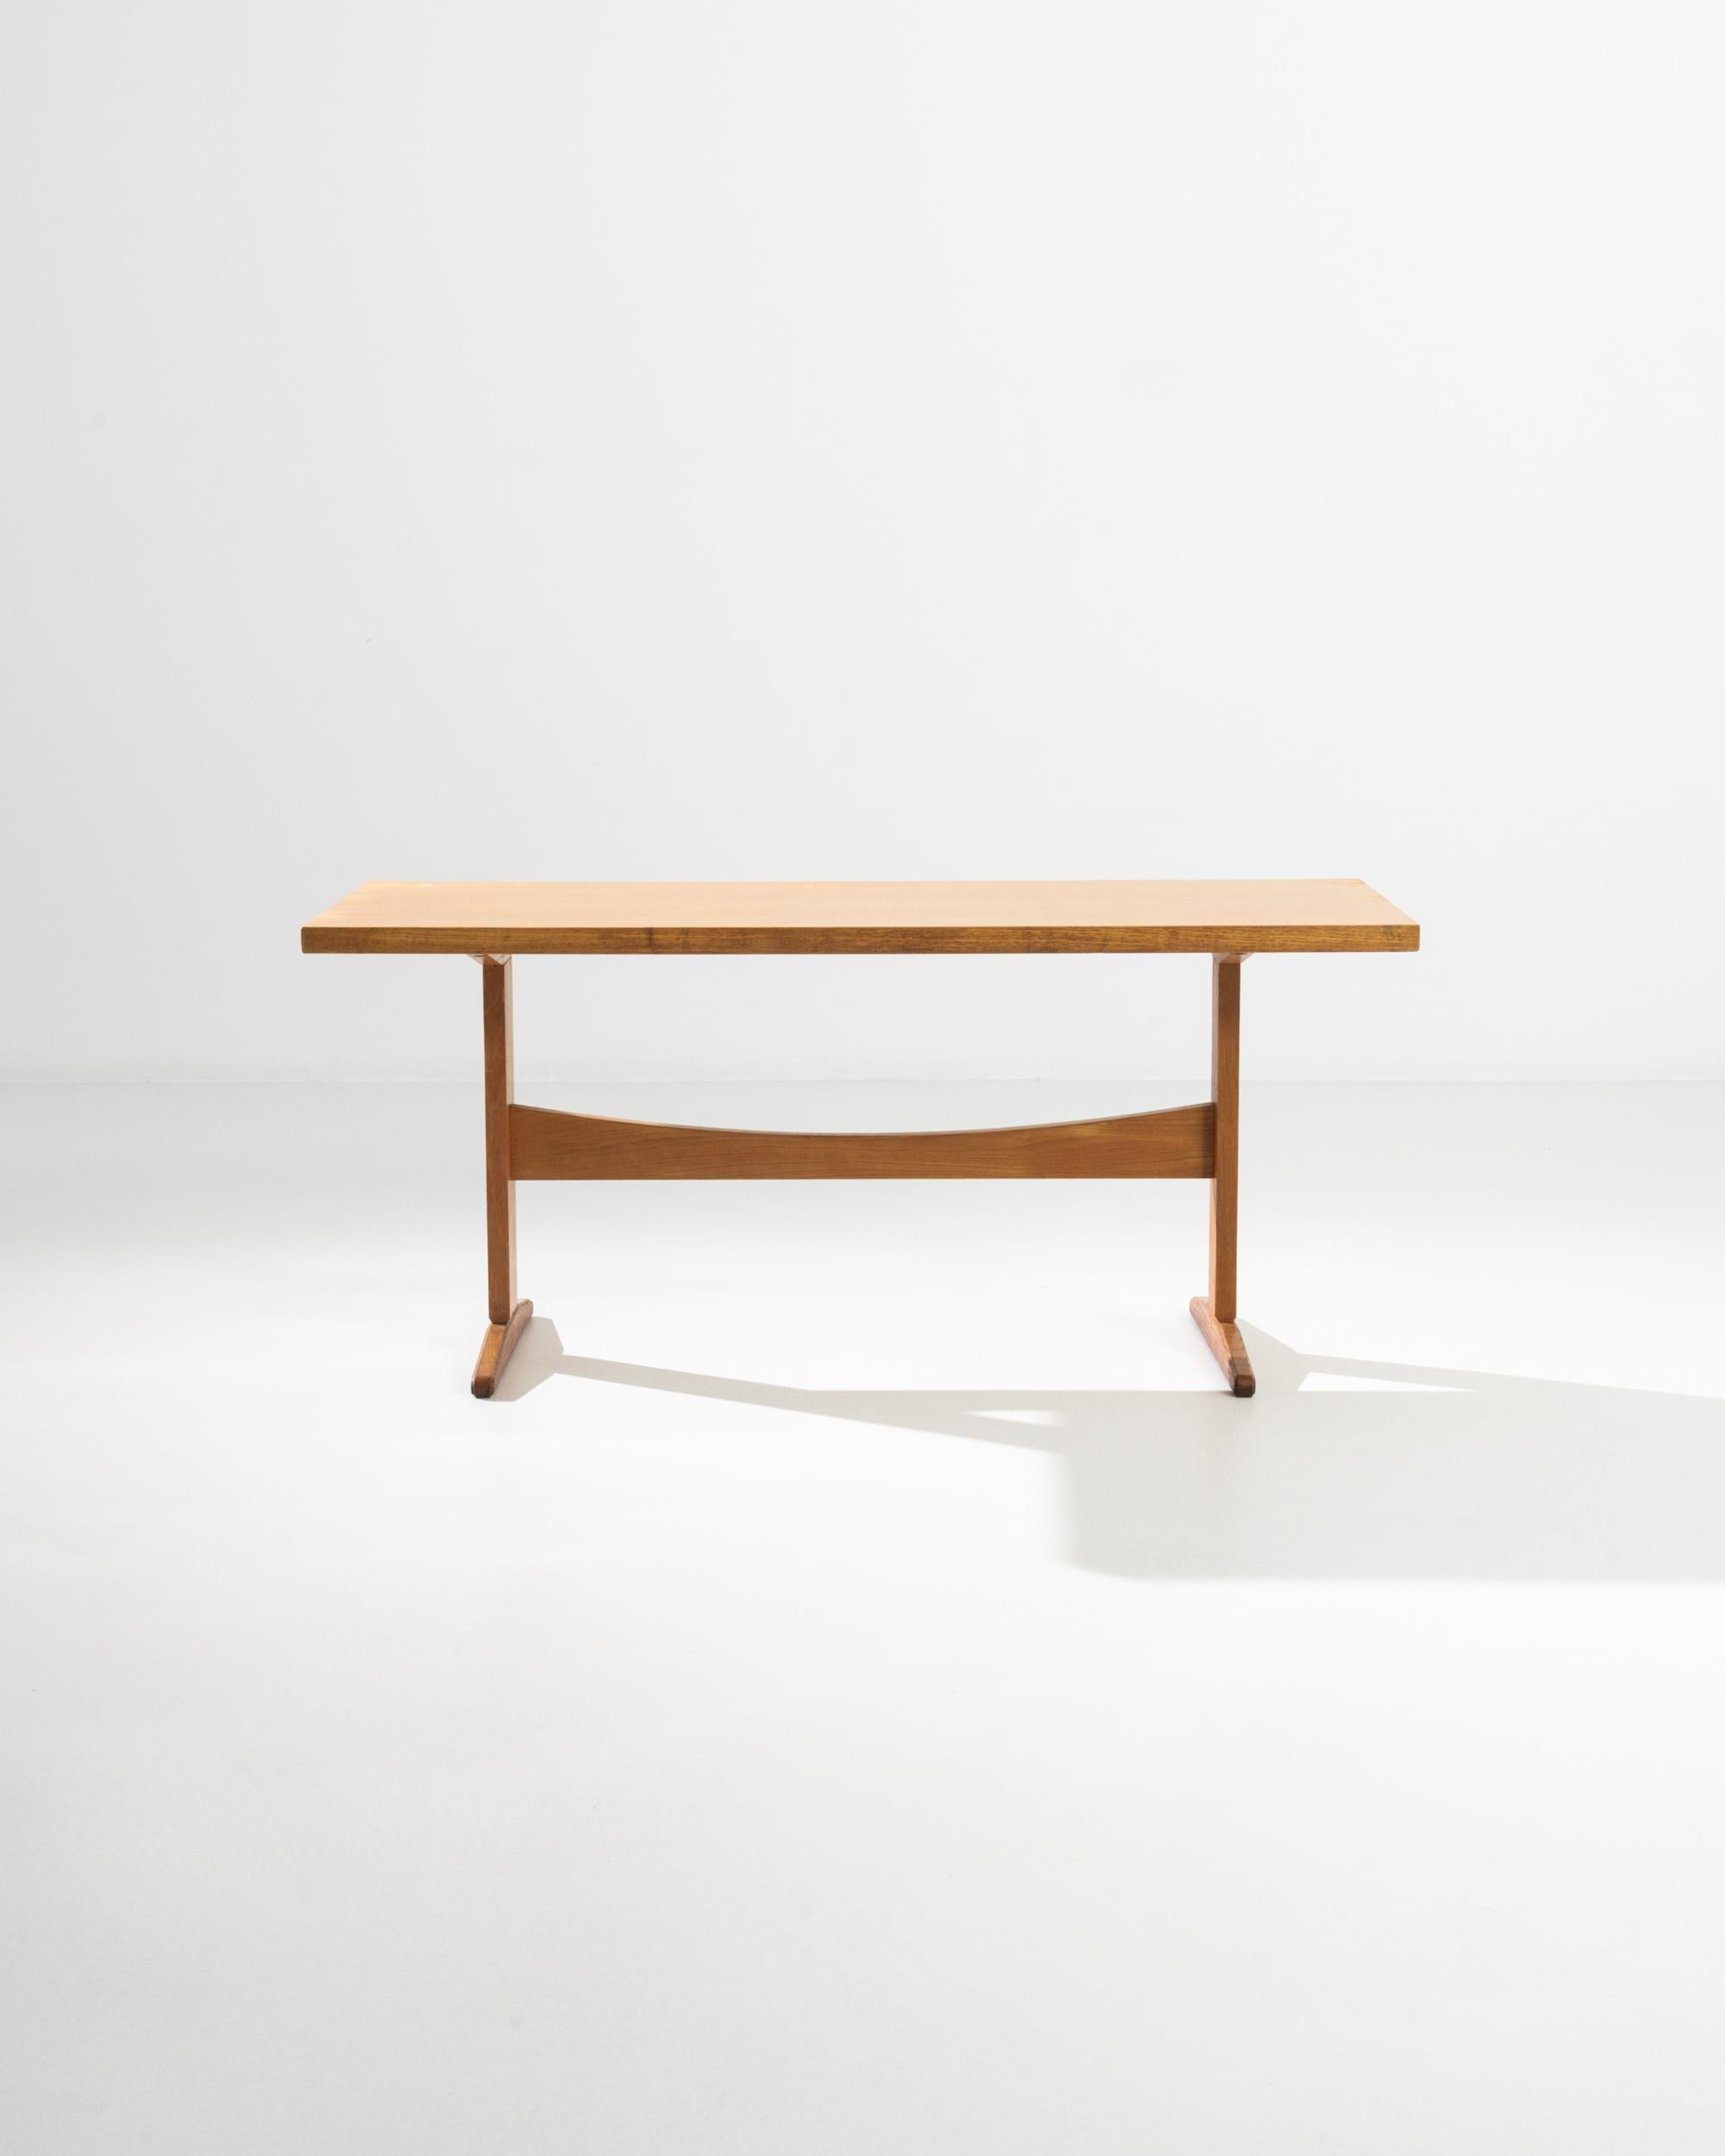 A Mid-Century Modernist twist on the classic trestle table, this vintage piece was built in Czechia in the mid 20th century. Clean lines in bright wood create a bold yet playful design. The curve of the stretcher, gentle yet precise, offers a